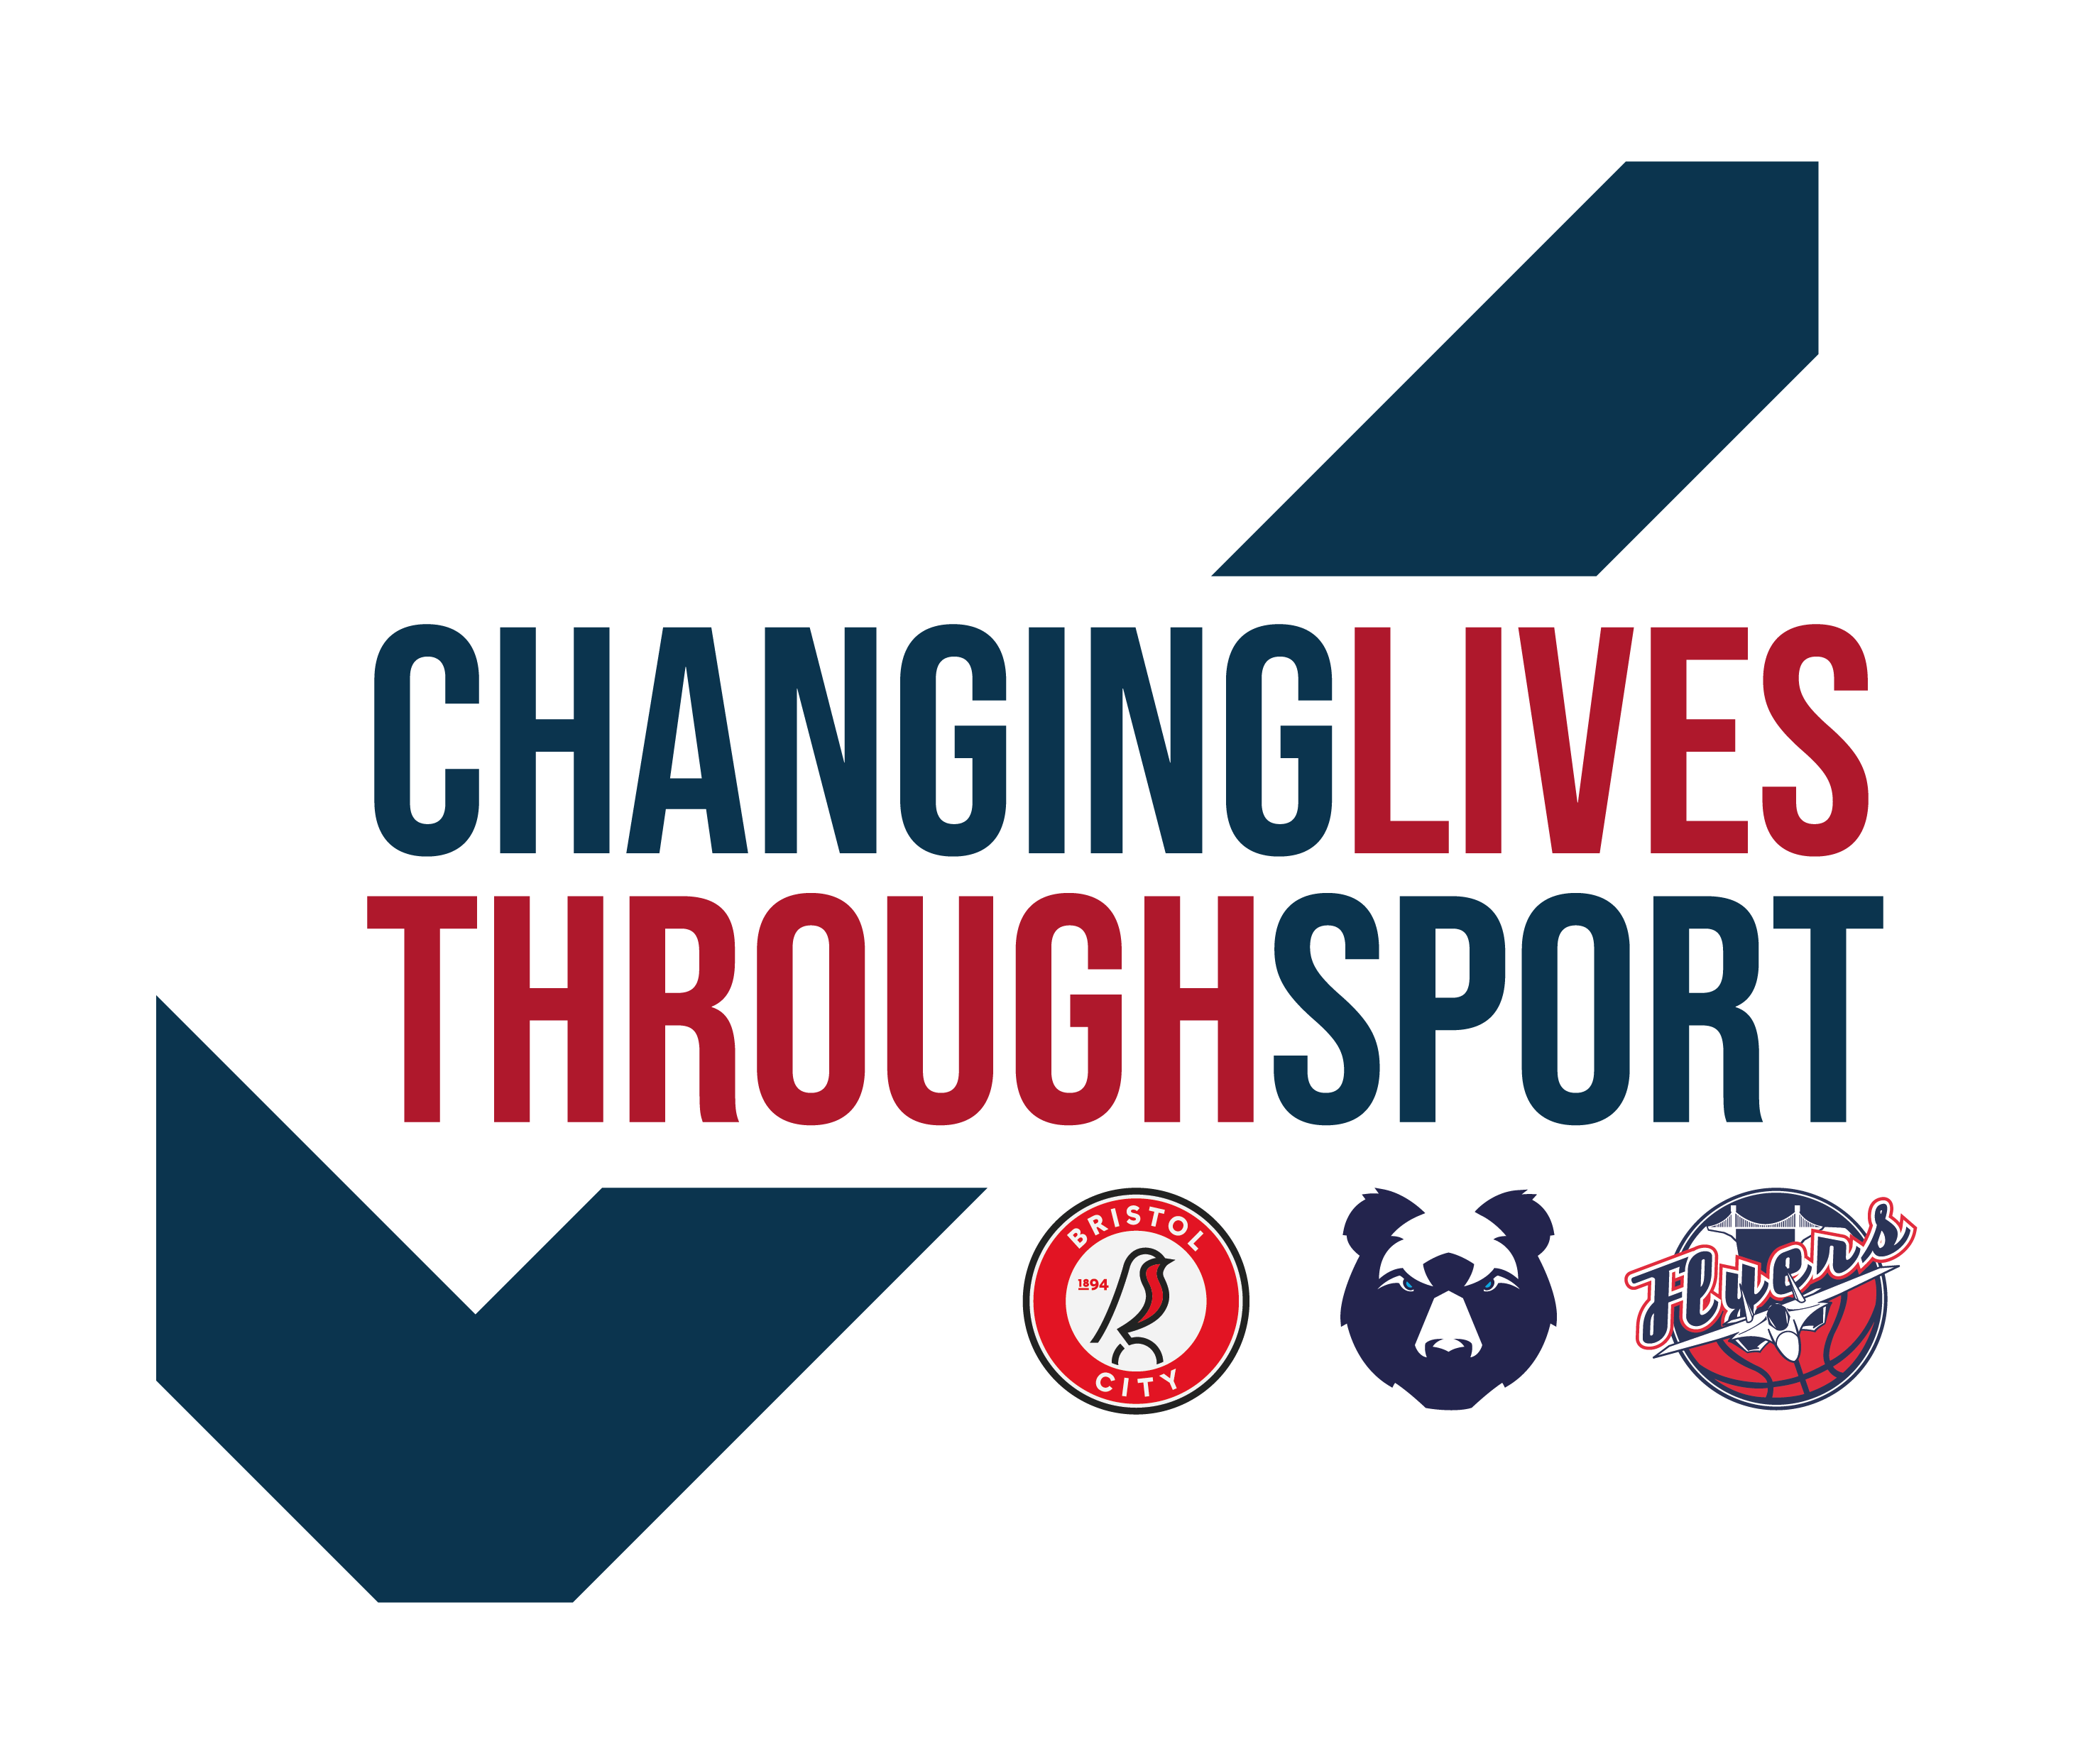 The charities associated with Bristol Sport aim to improve health and increase social mobility for all people in Bristol but especially those from low social economic groups and those with an identified need or disadvantage.